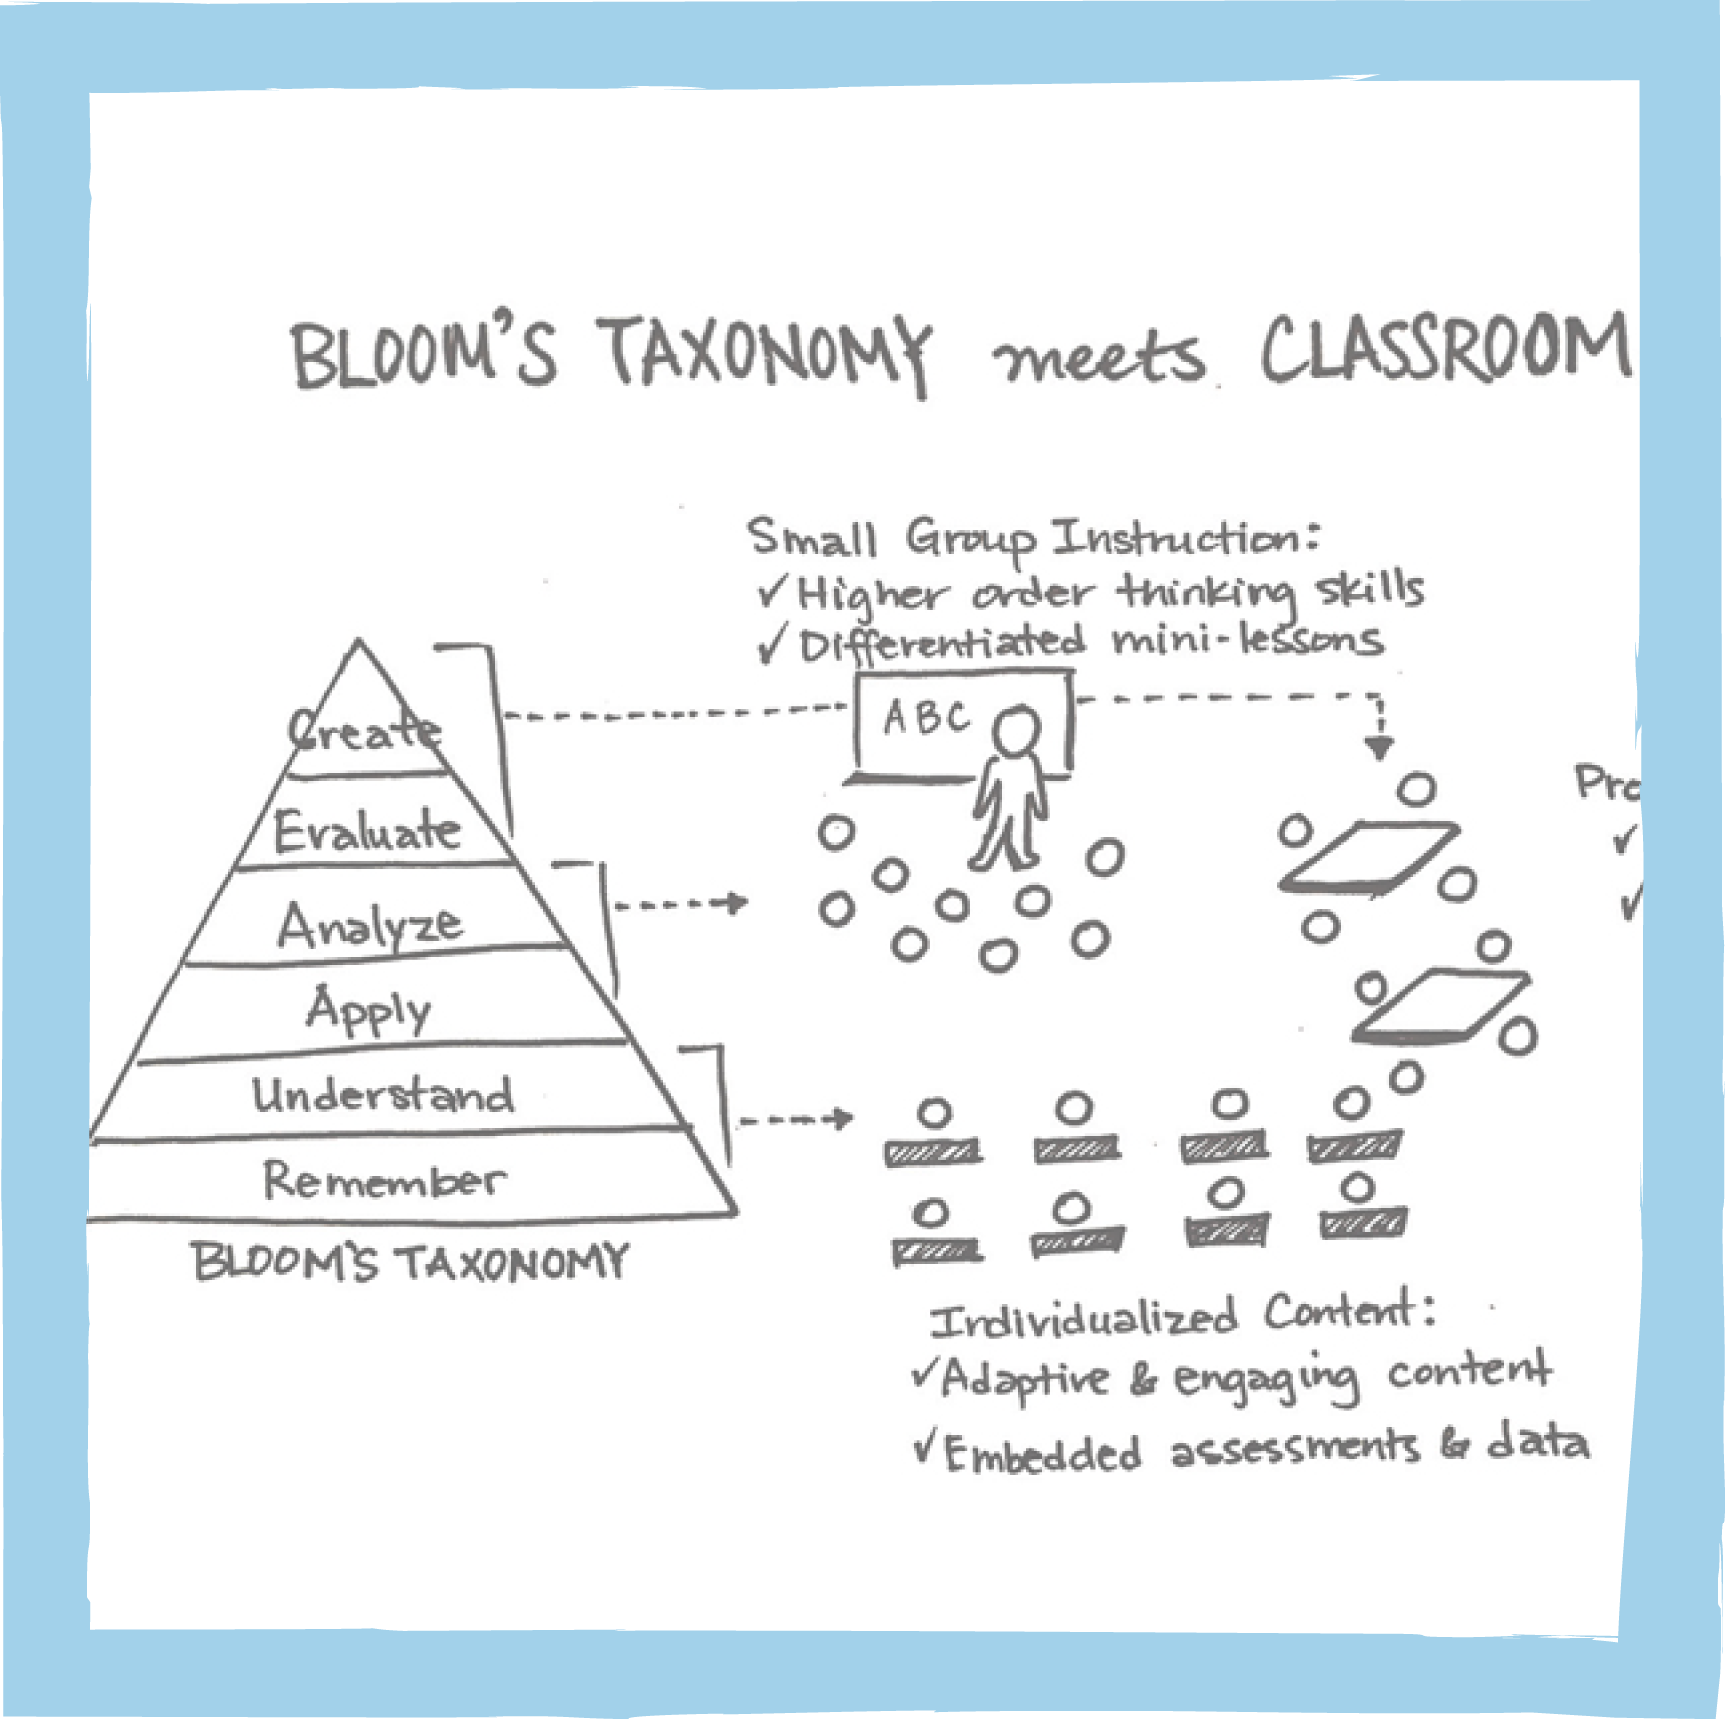 With Personalized Learning, teachers can focus on higher level of blooms